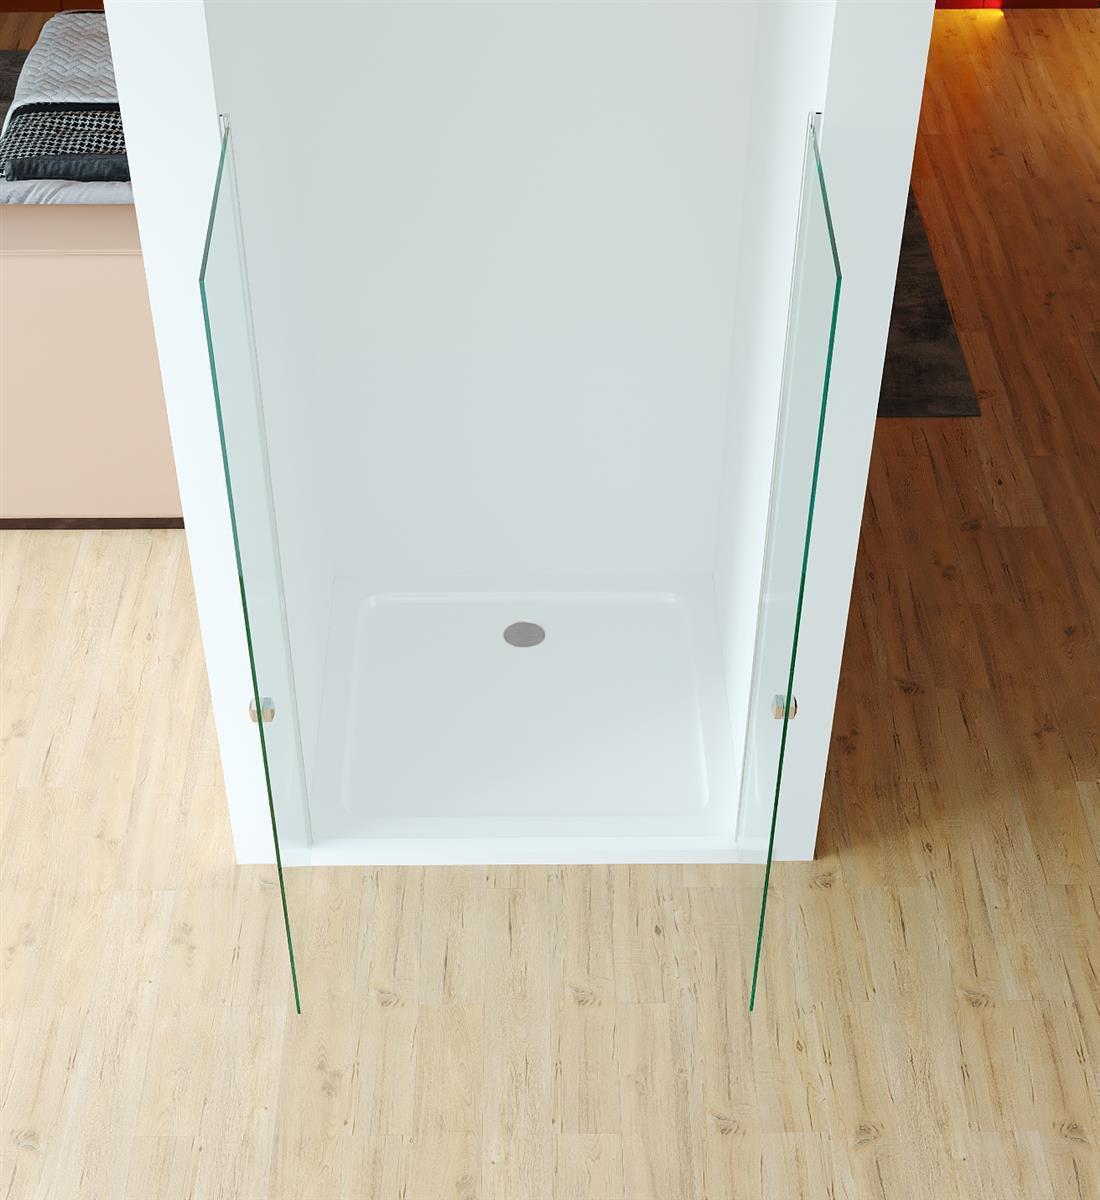 GlasHomeCenter - niche cabin California (110 x 195 cm) - 6mm toughened safety glass - without shower tray